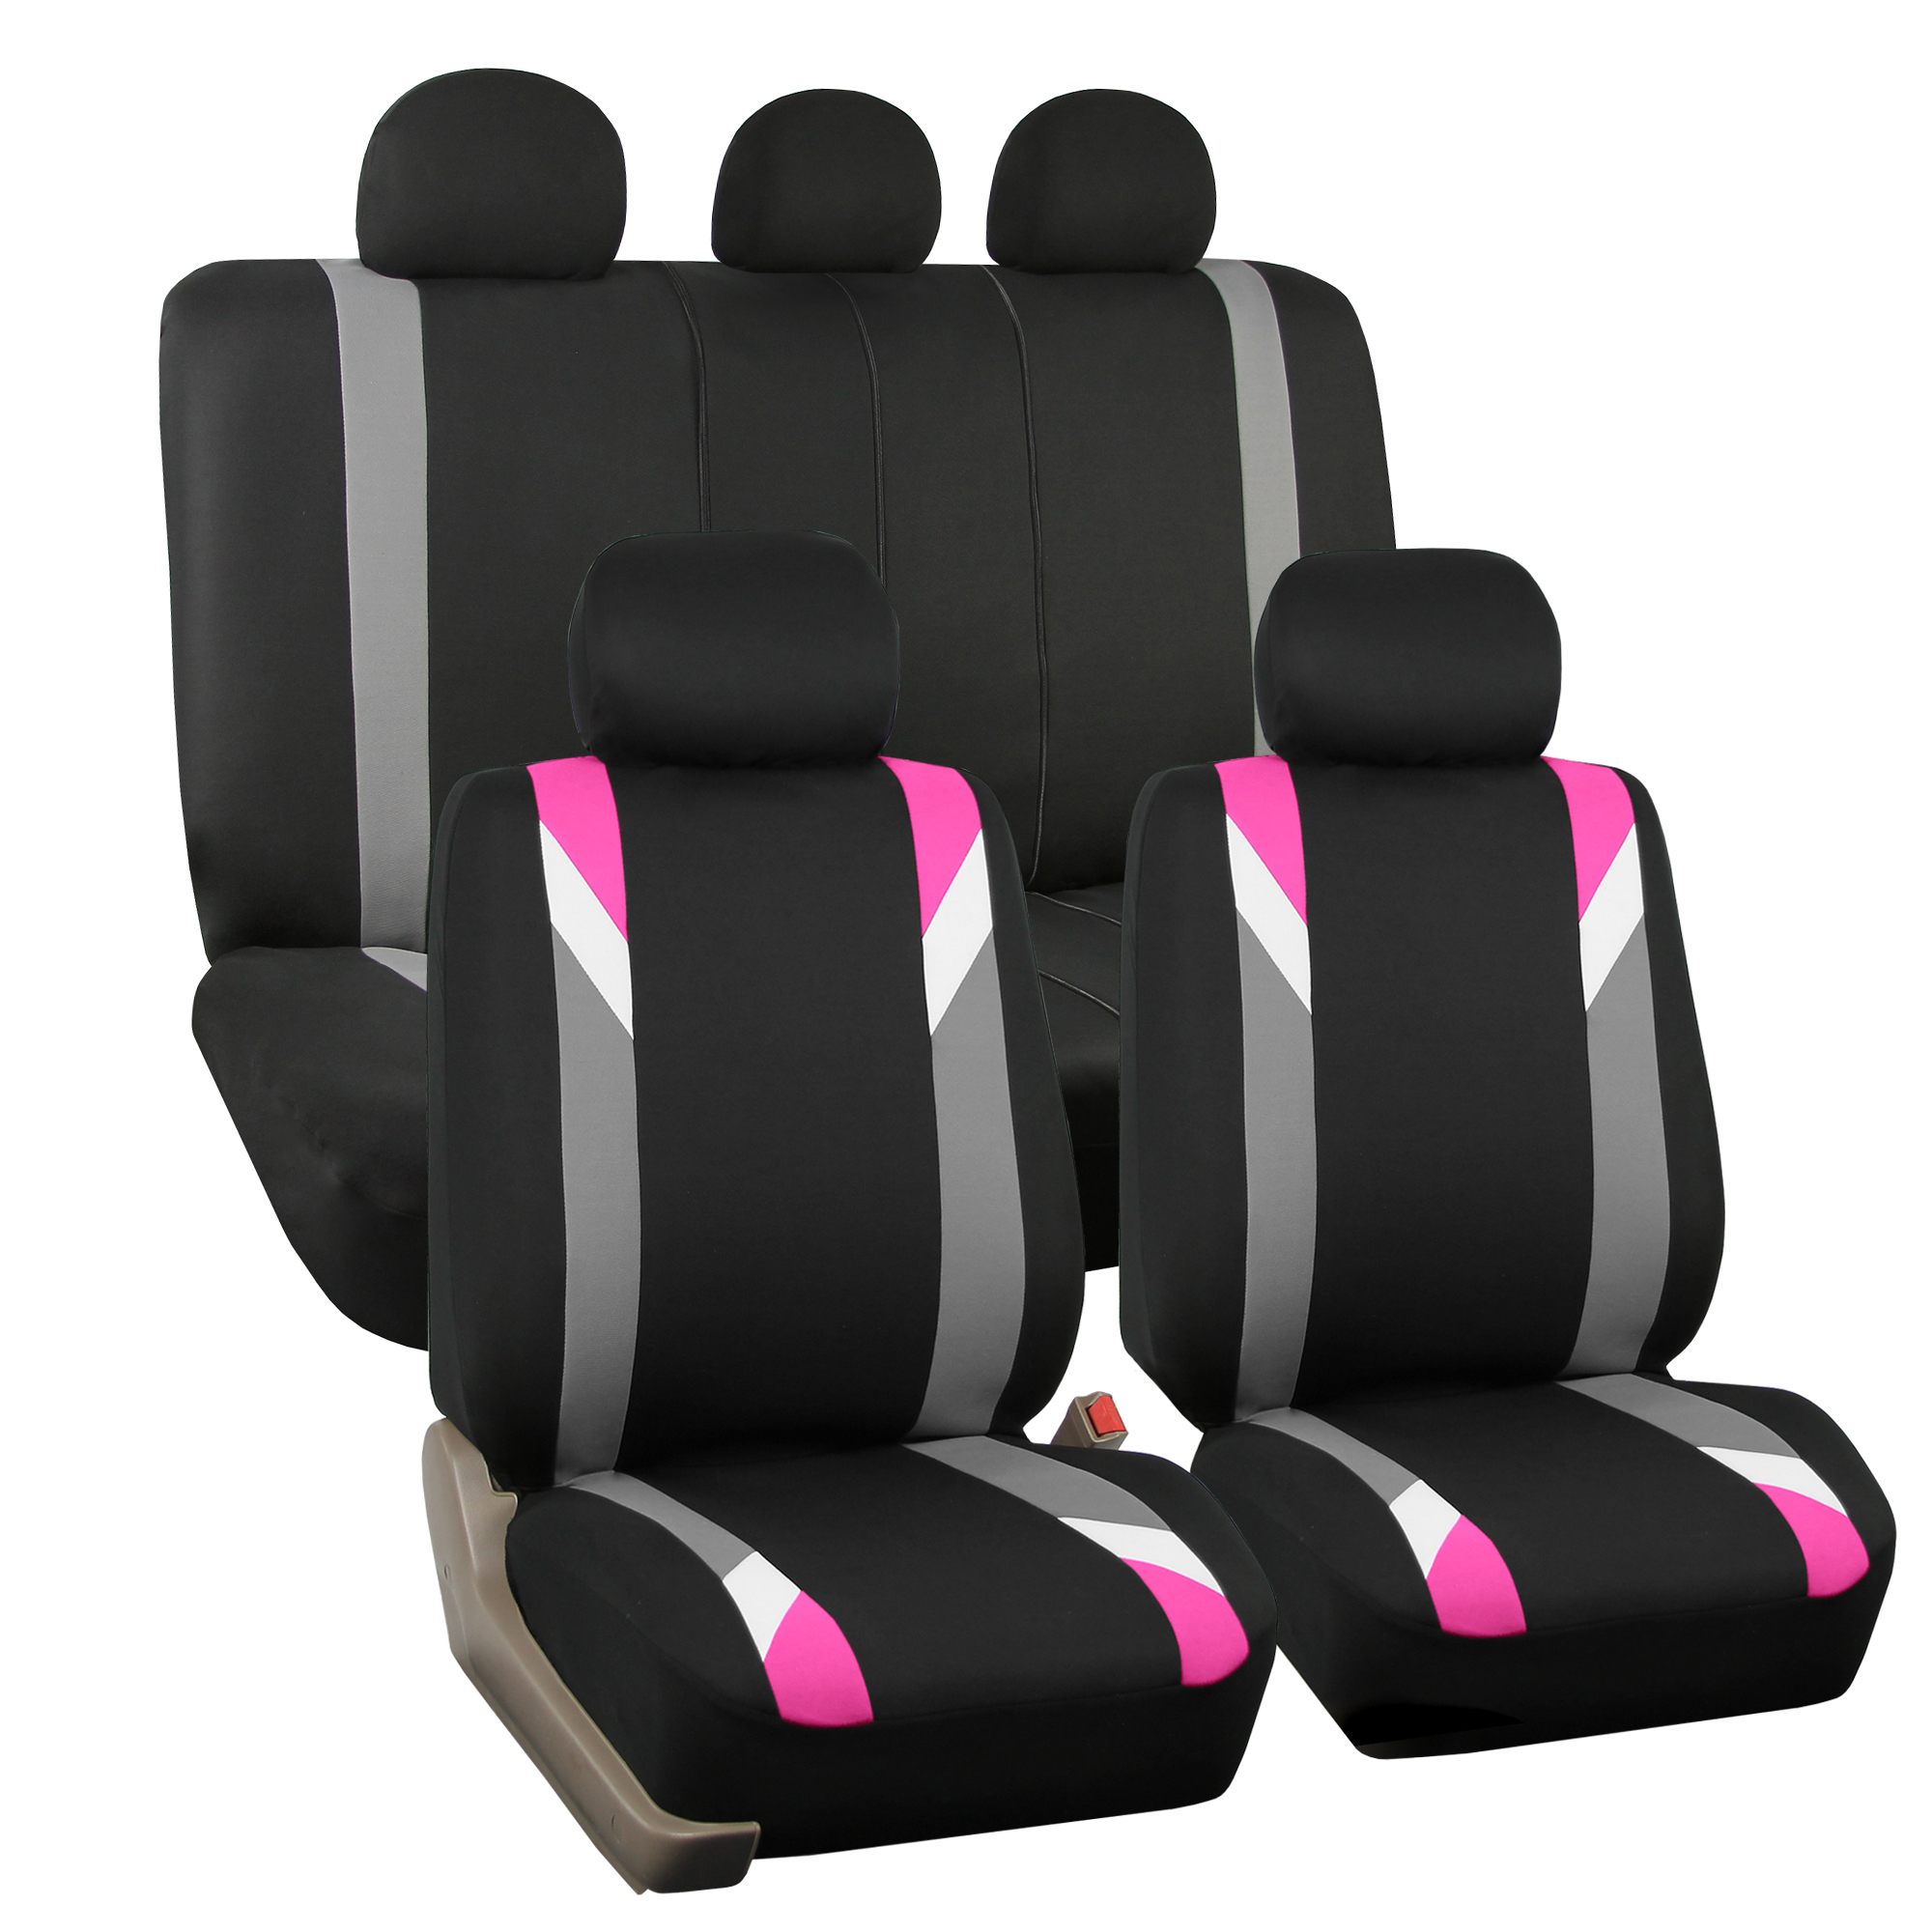 FH Group Premium Modernistic Car Seat Covers Combo, Full Set with Leather Steering Wheel Cover, Pink Black - image 3 of 9